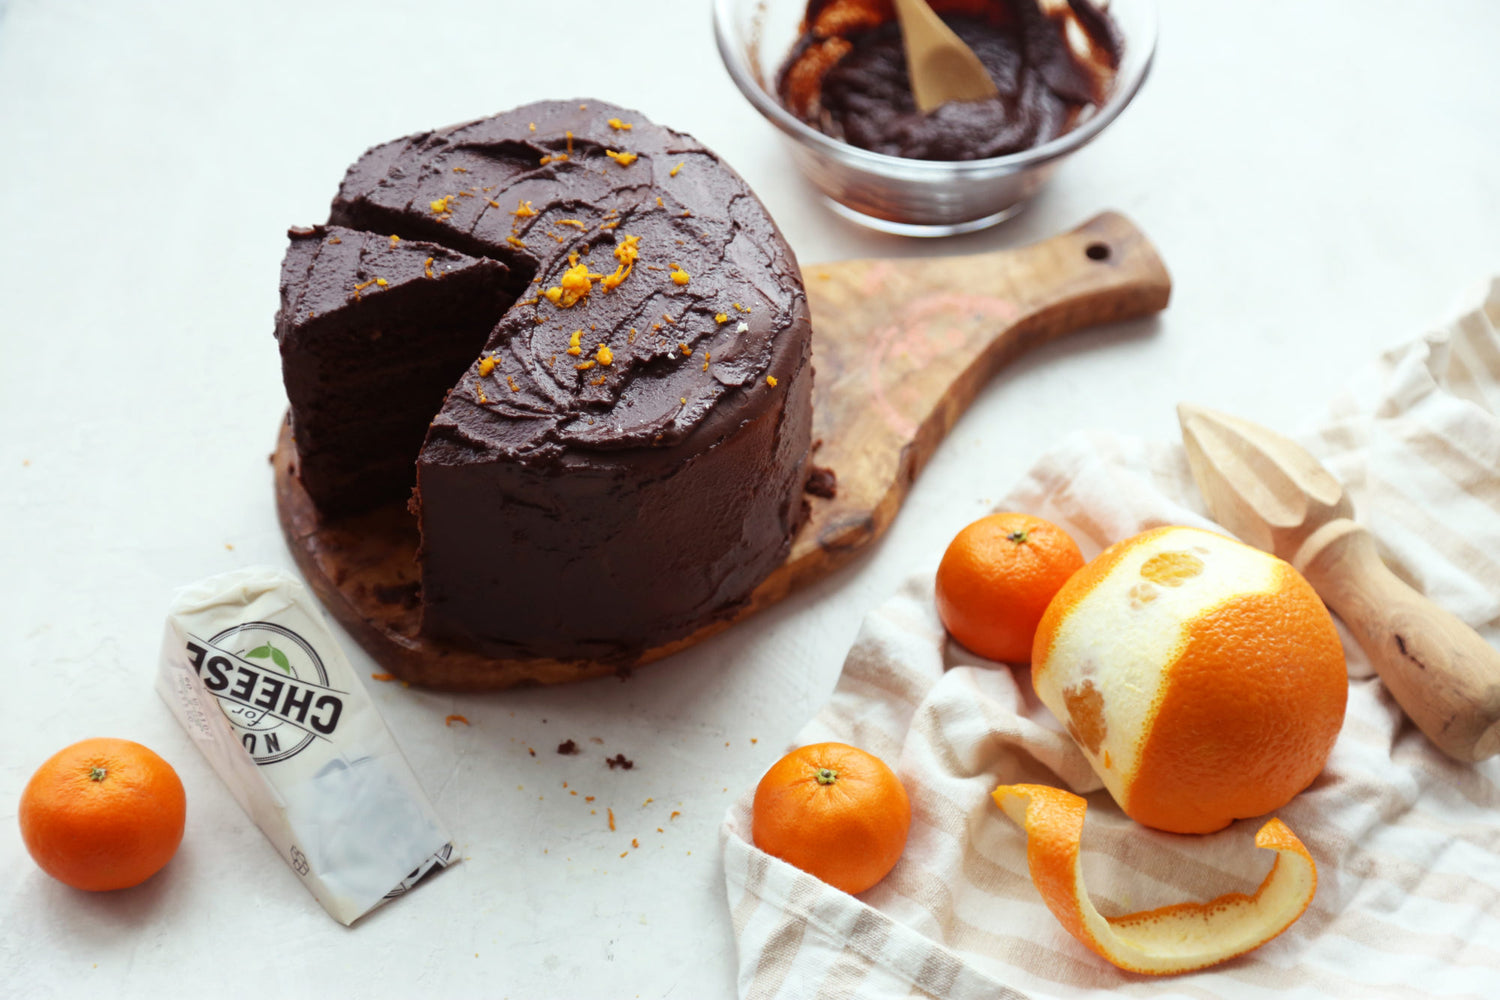 Double layer chocolate cake with a slice cut out, made with hints of orange and dairy free cheese sits on a cutting board next to fresh oranges and a wedge of dairy-free cheese.